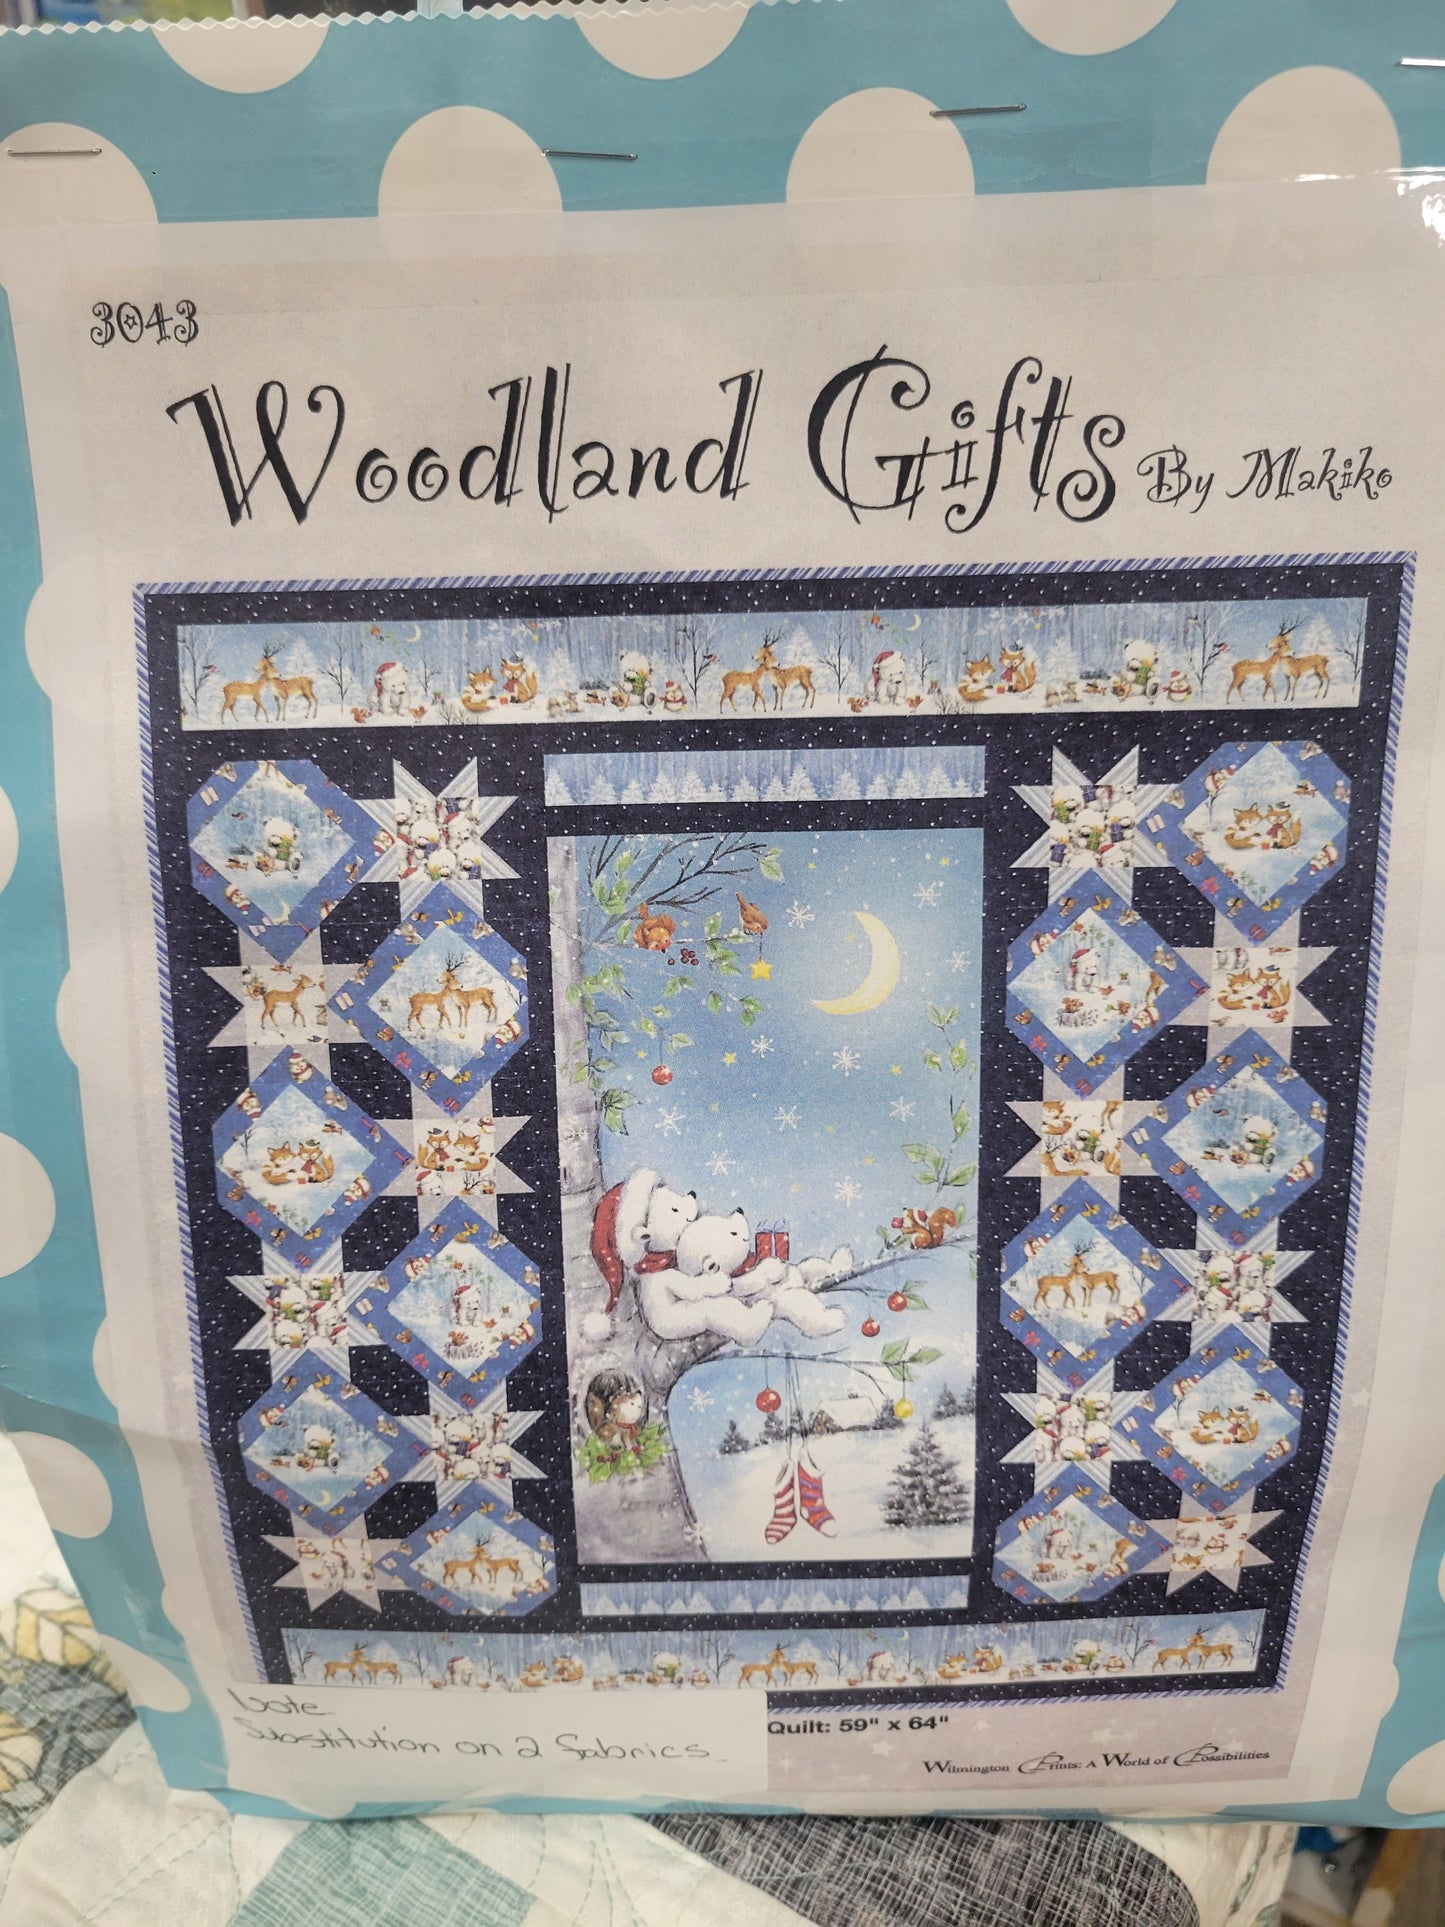 Woodland gifts quilt kit 59" x 64"